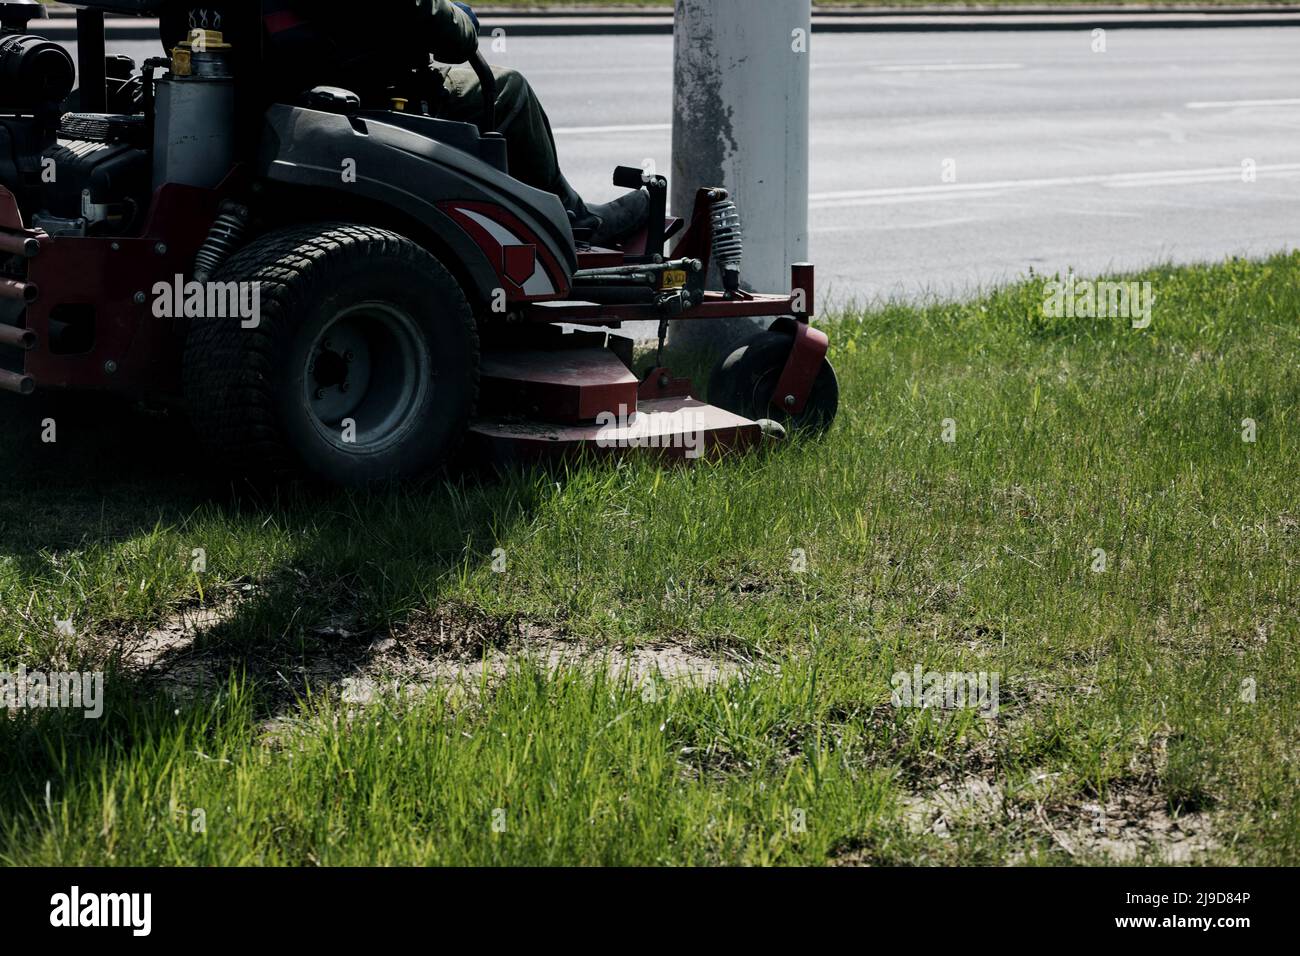 Ride-on lawnmower. concept of mowing the lawn, lawnmower cutting grass with gardening tools Stock Photo